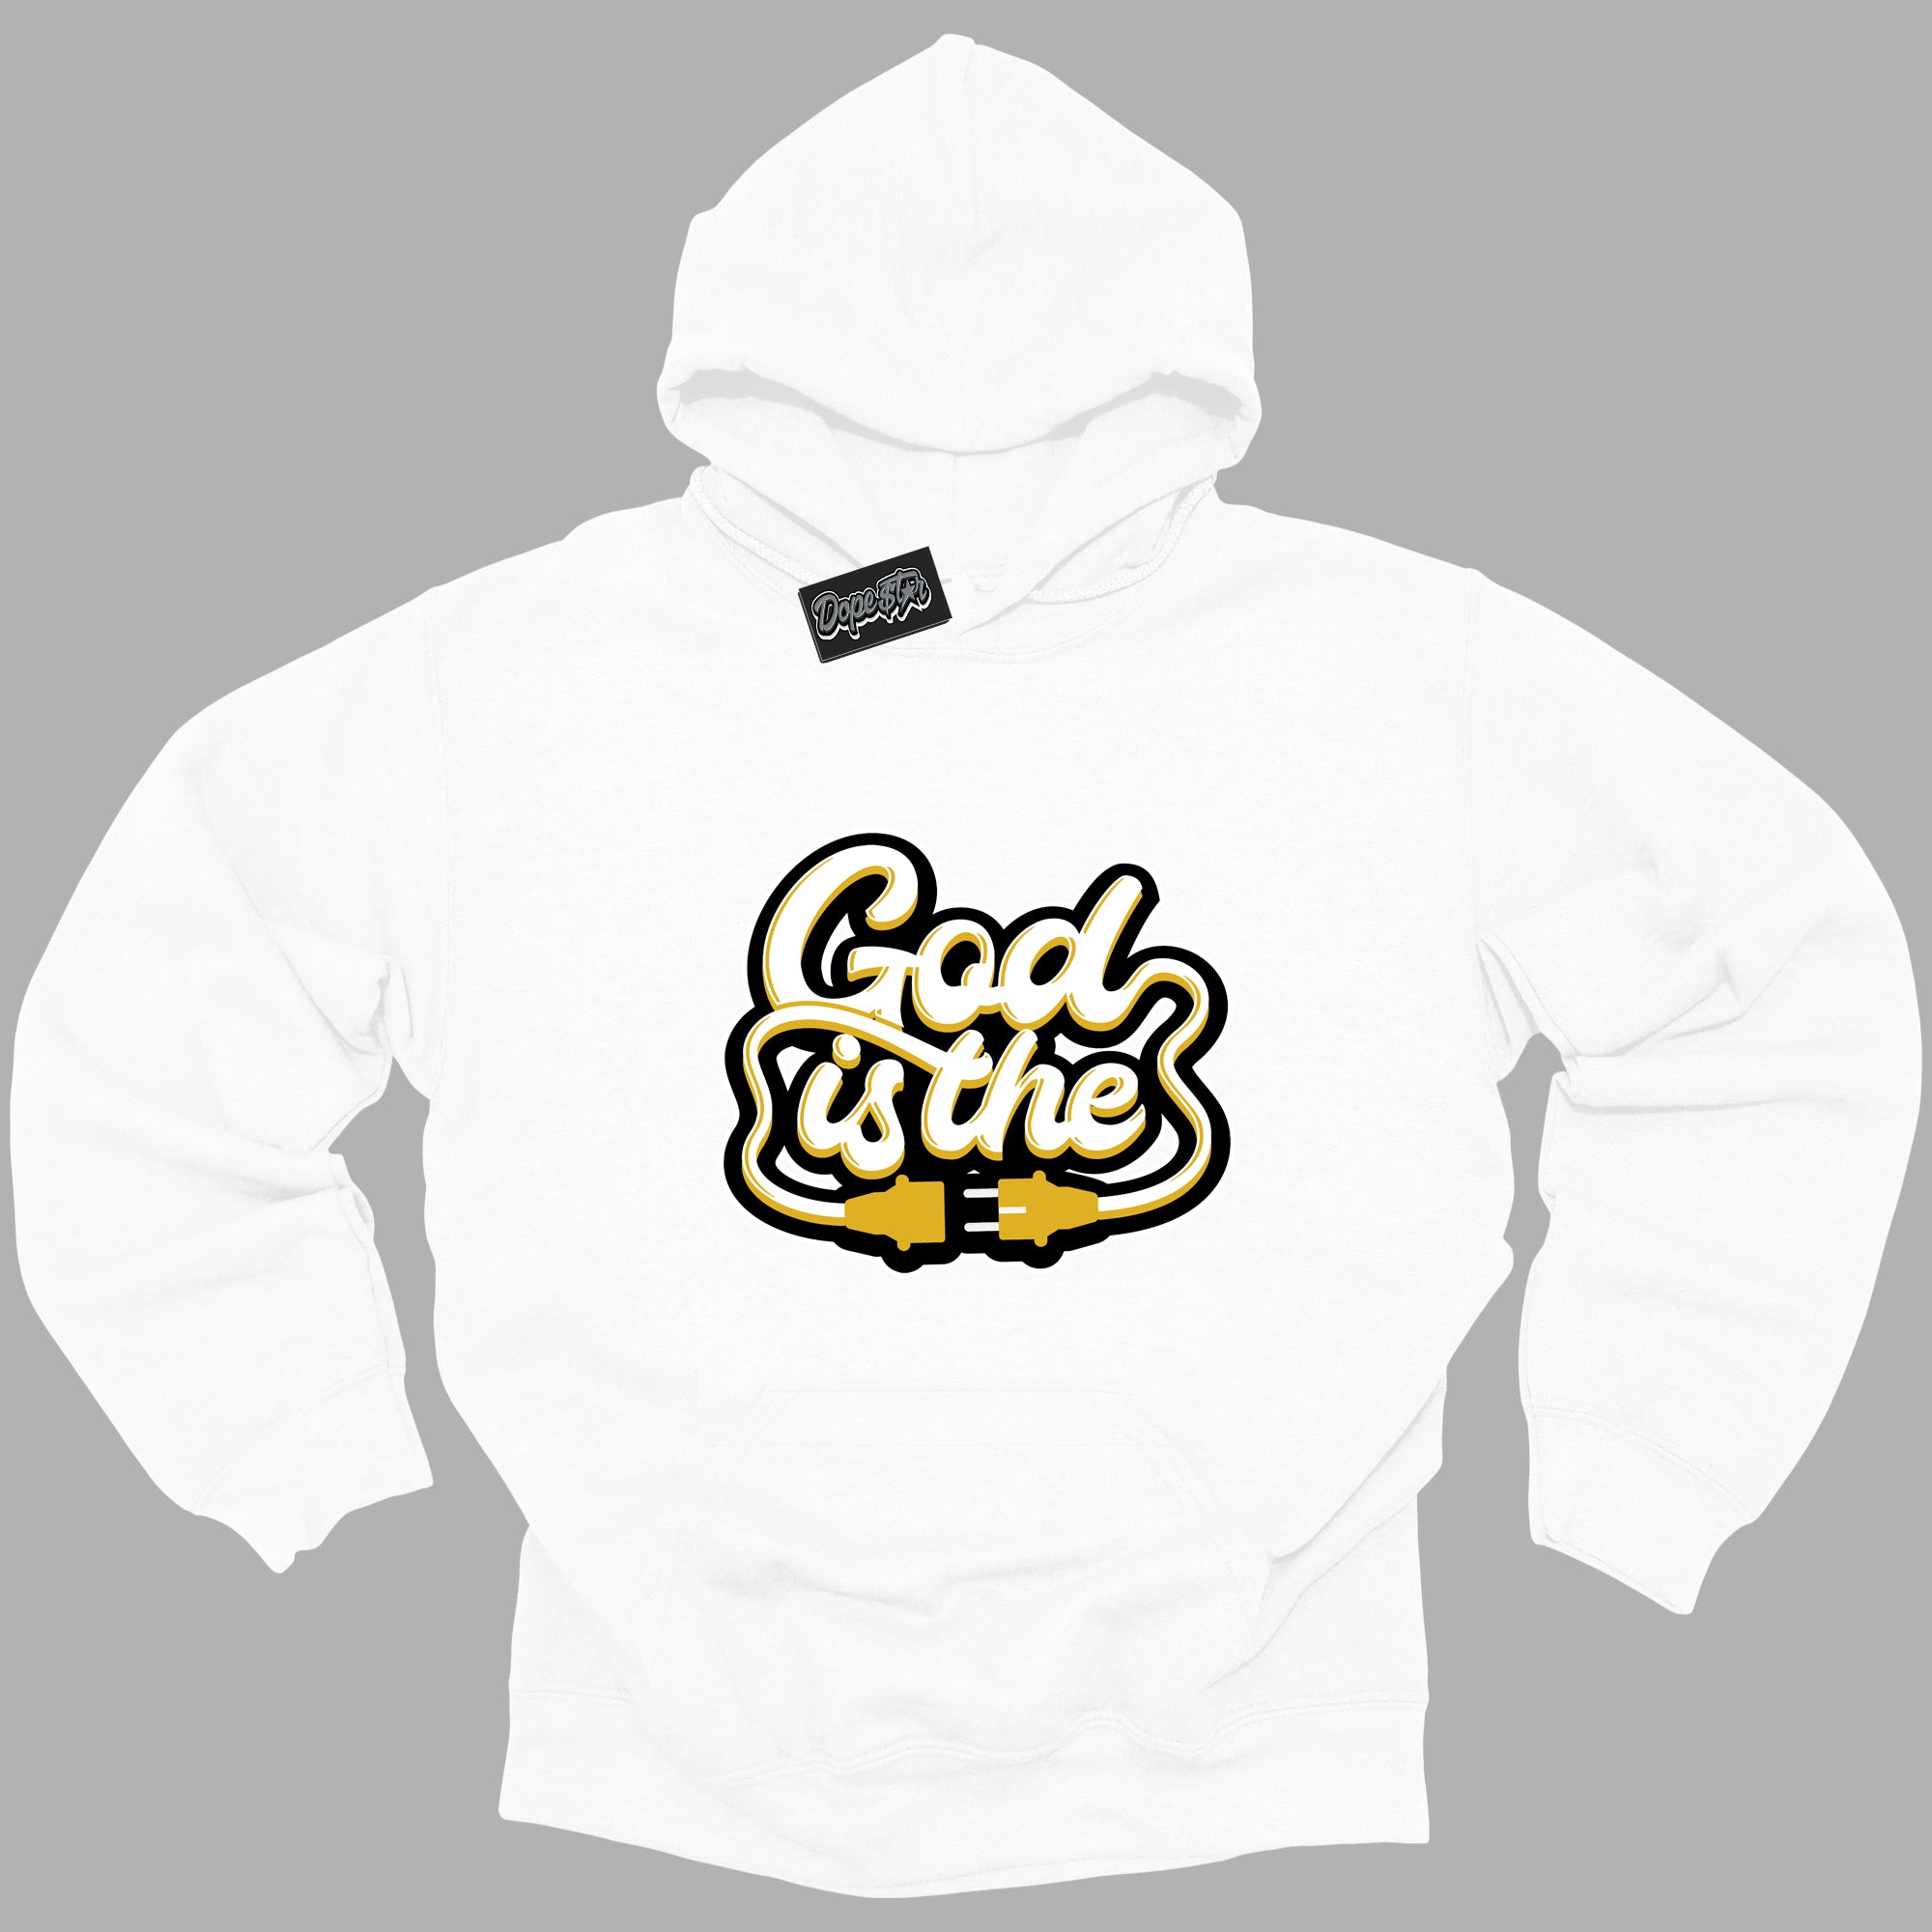 Cool White Hoodie with “ God Is The ”  design that Perfectly Matches Yellow Ochre 6s Sneakers.